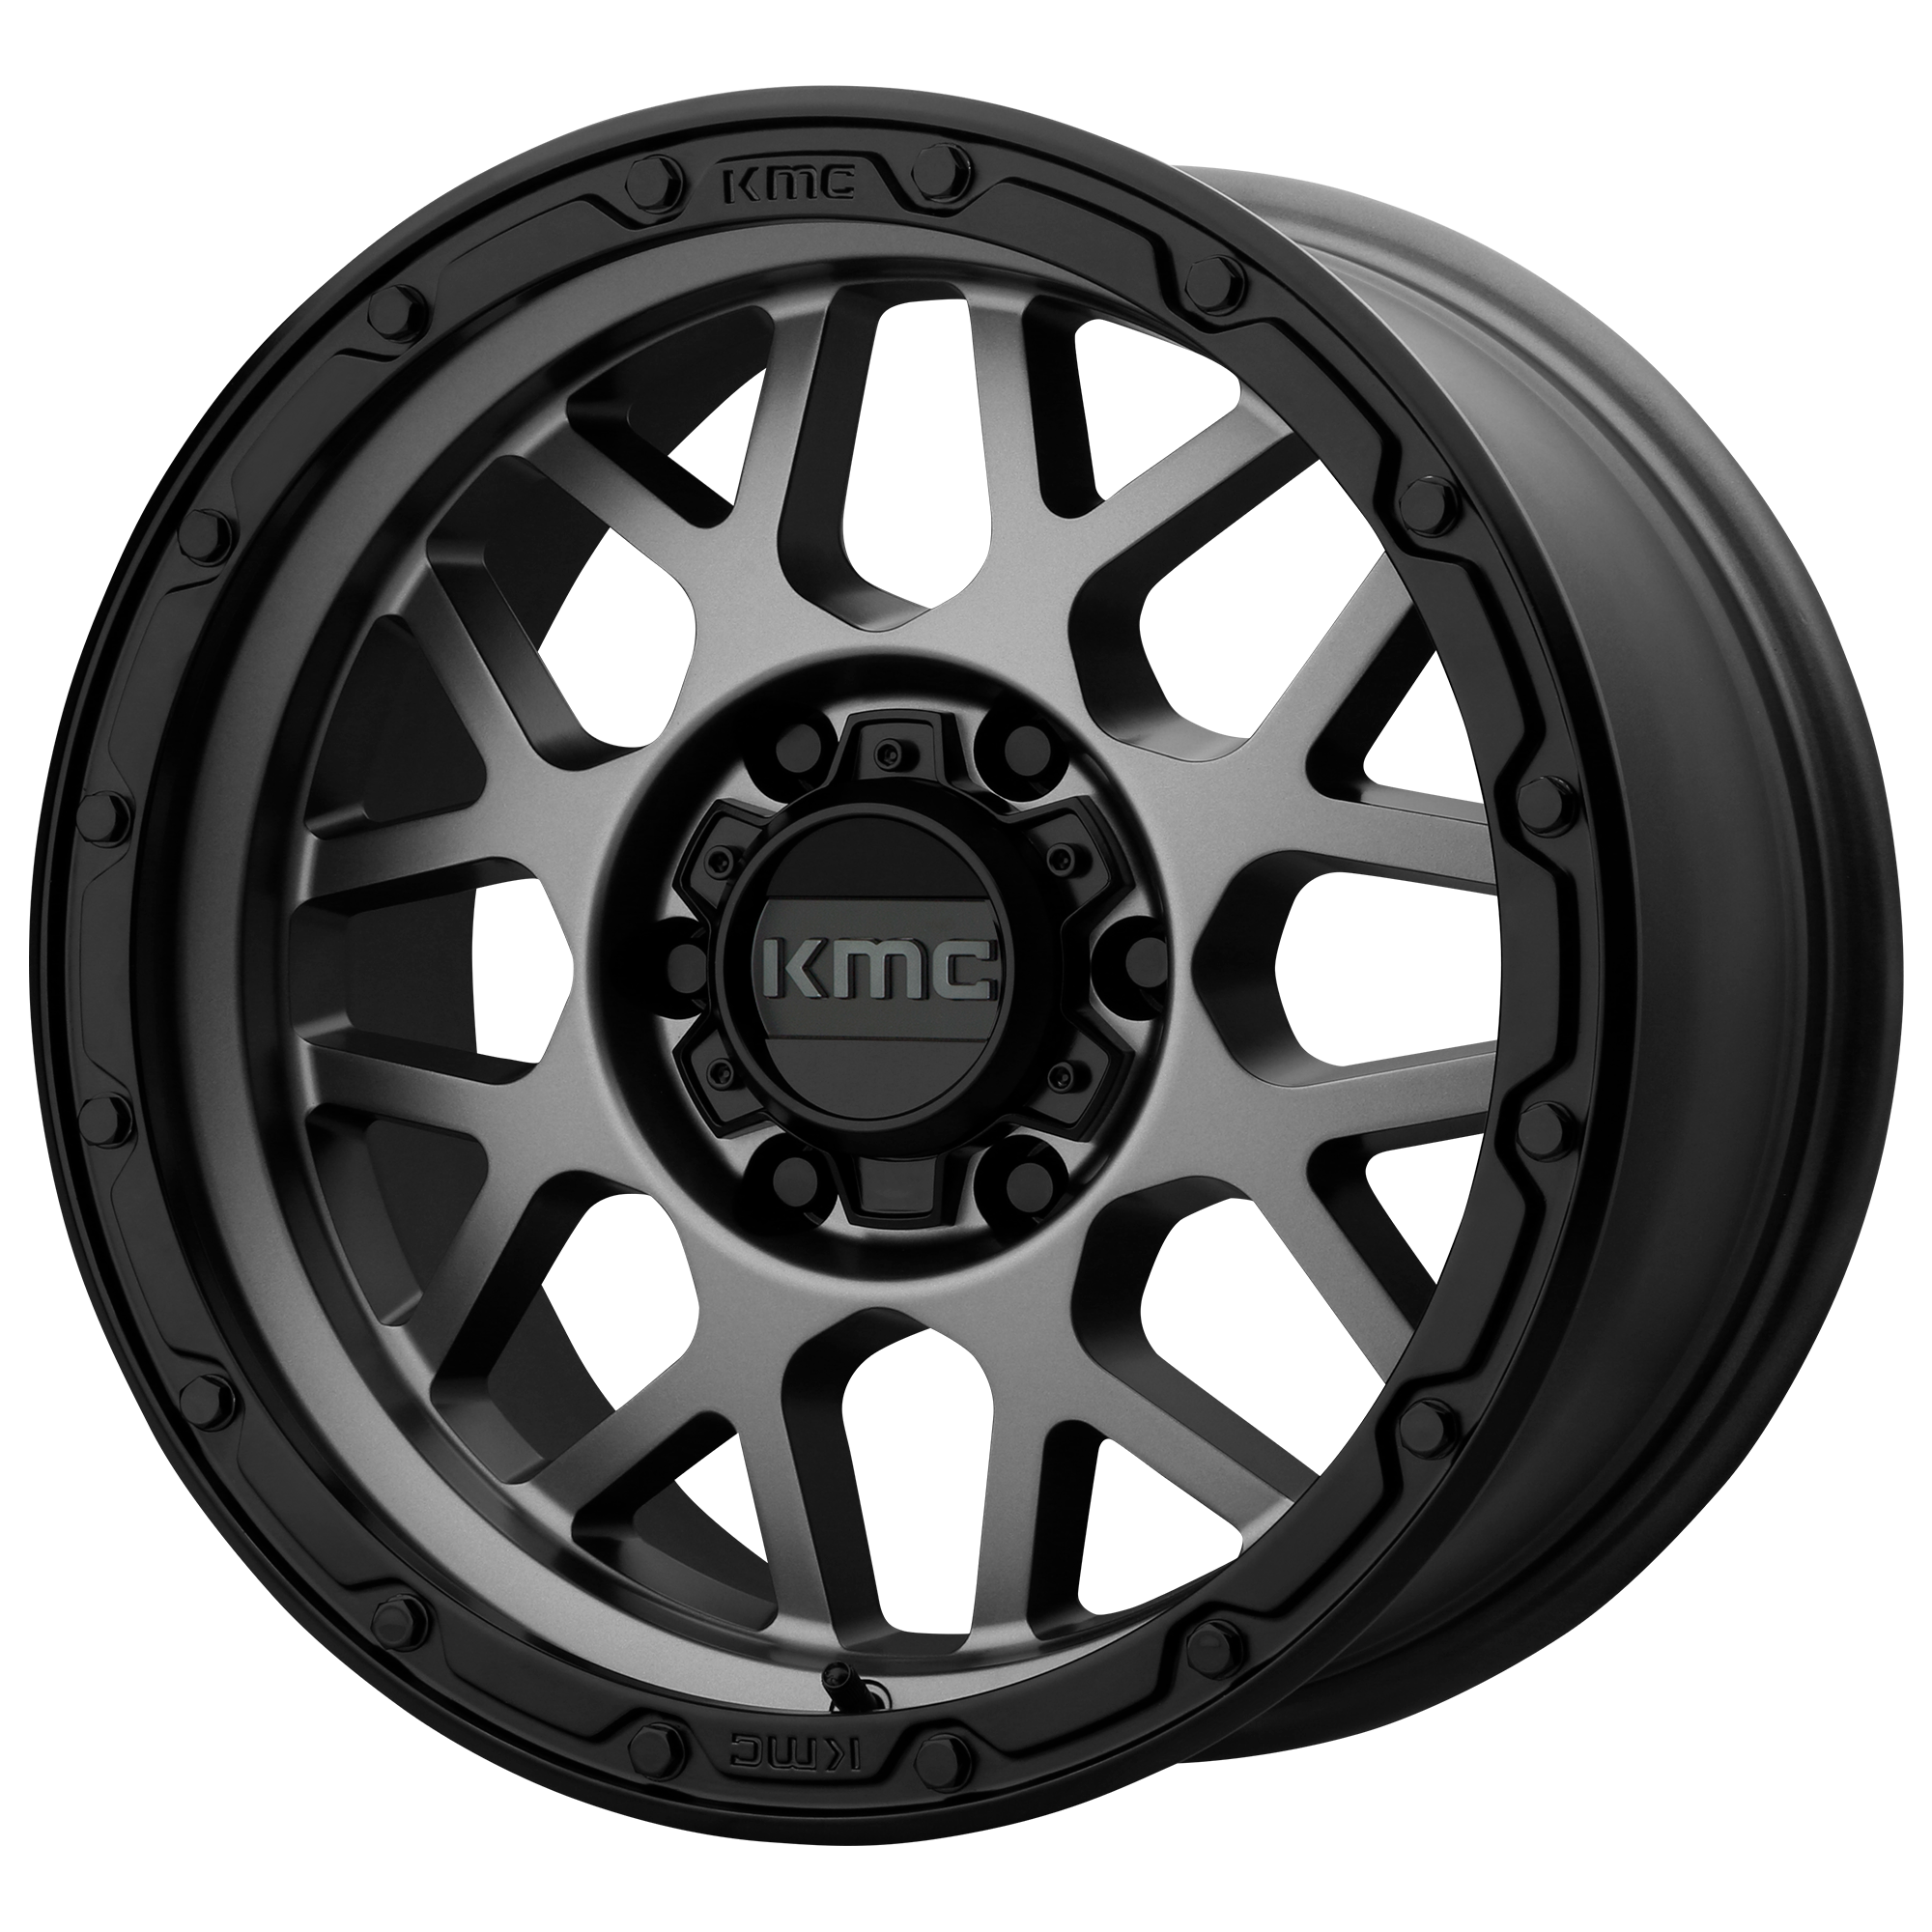 GRENADE OFF-ROAD 18x8.5 6x139.70 MATTE GRAY W/ MATTE BLACK LIP (0 mm) - Tires and Engine Performance